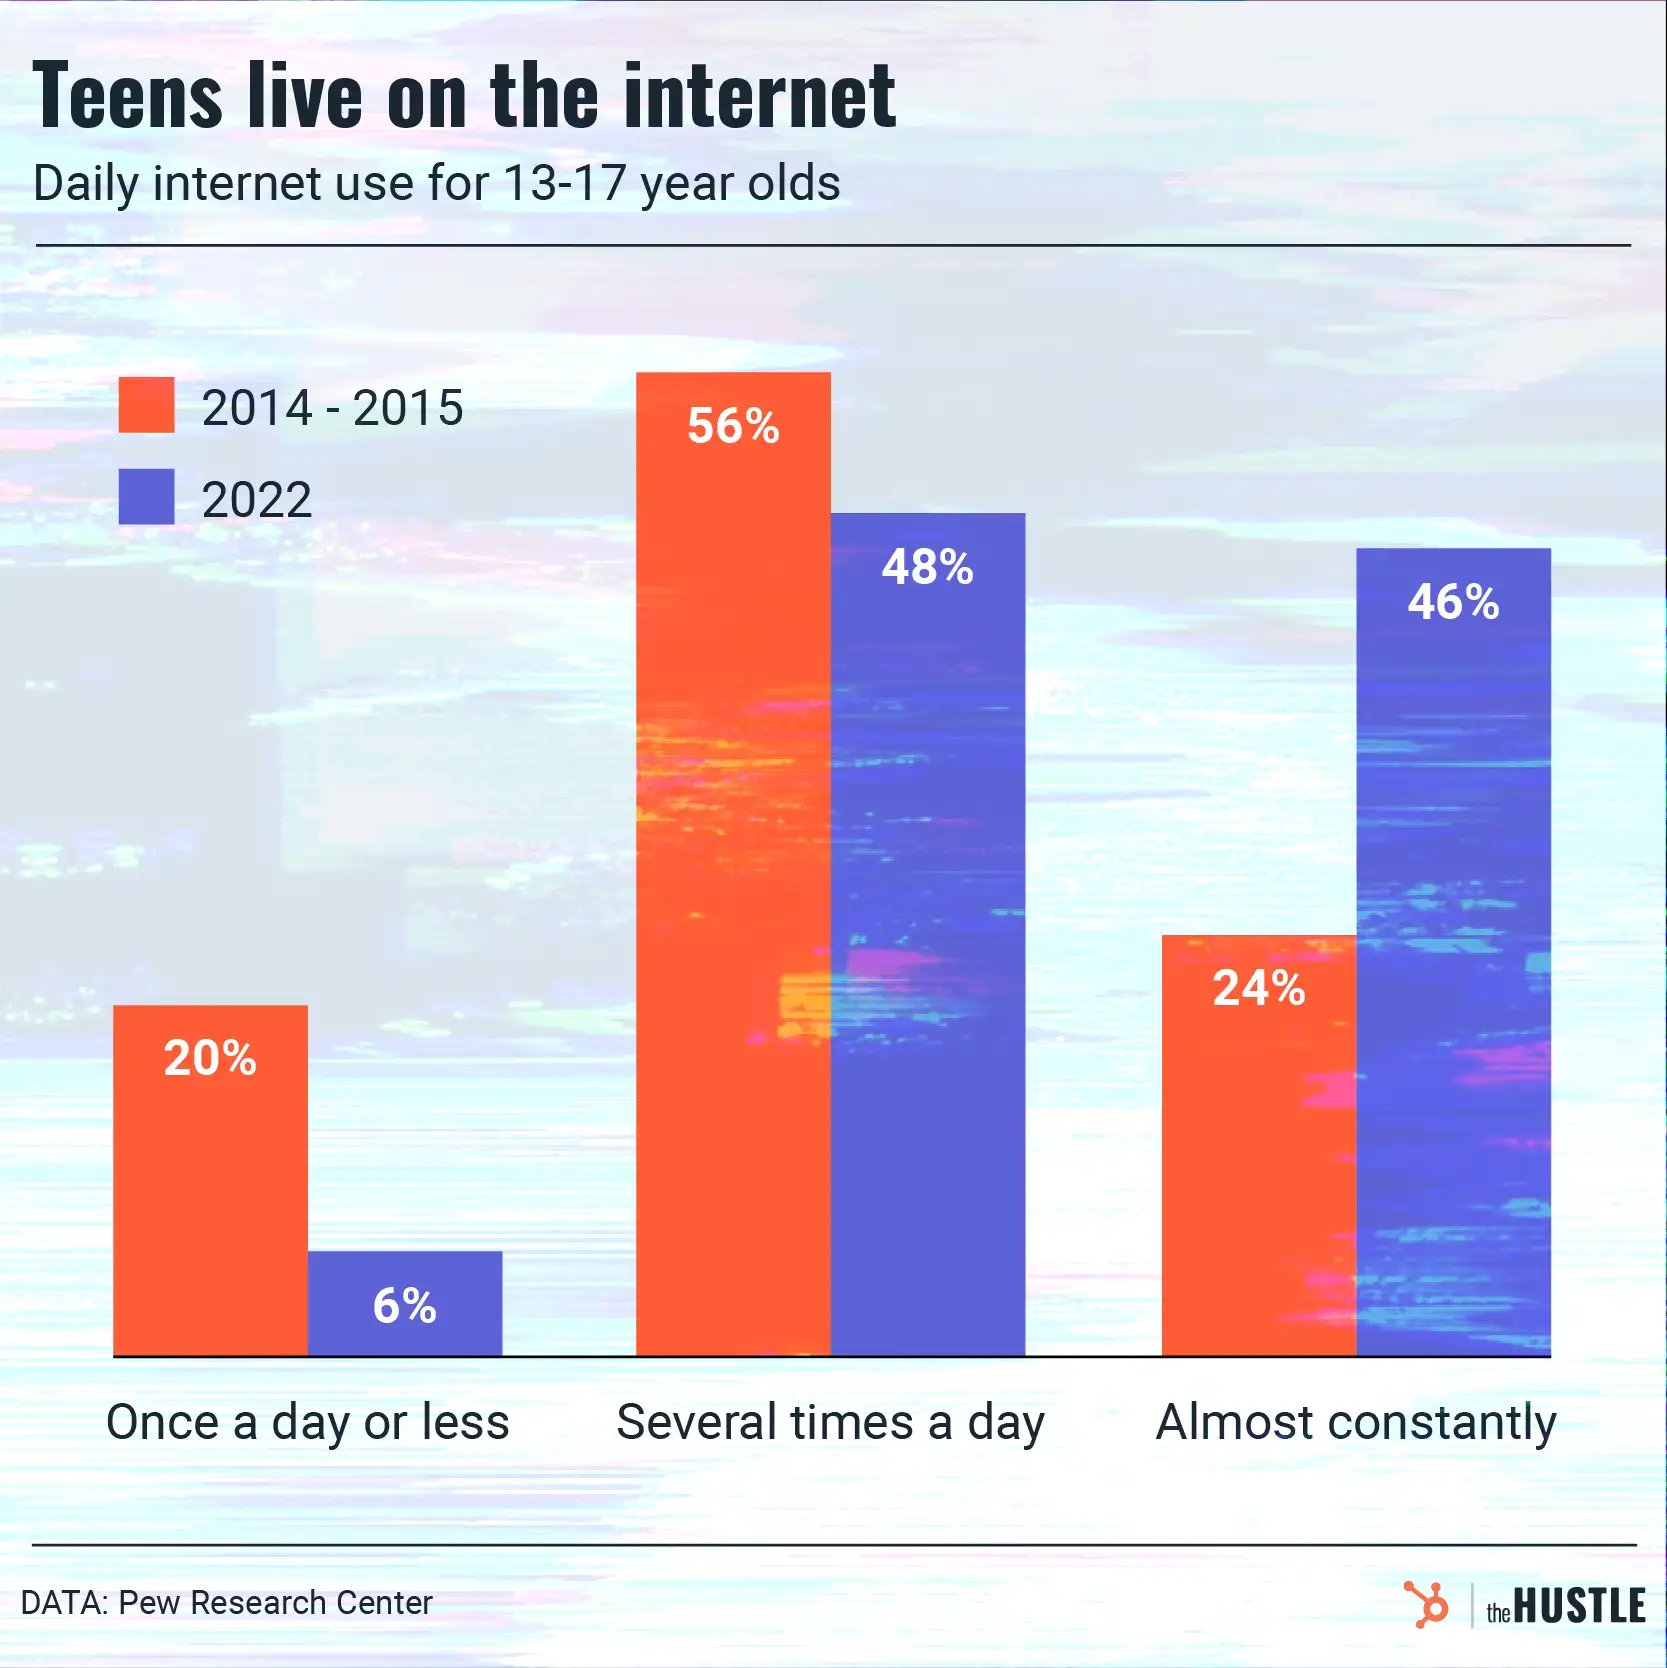 The implications of teen internet usage